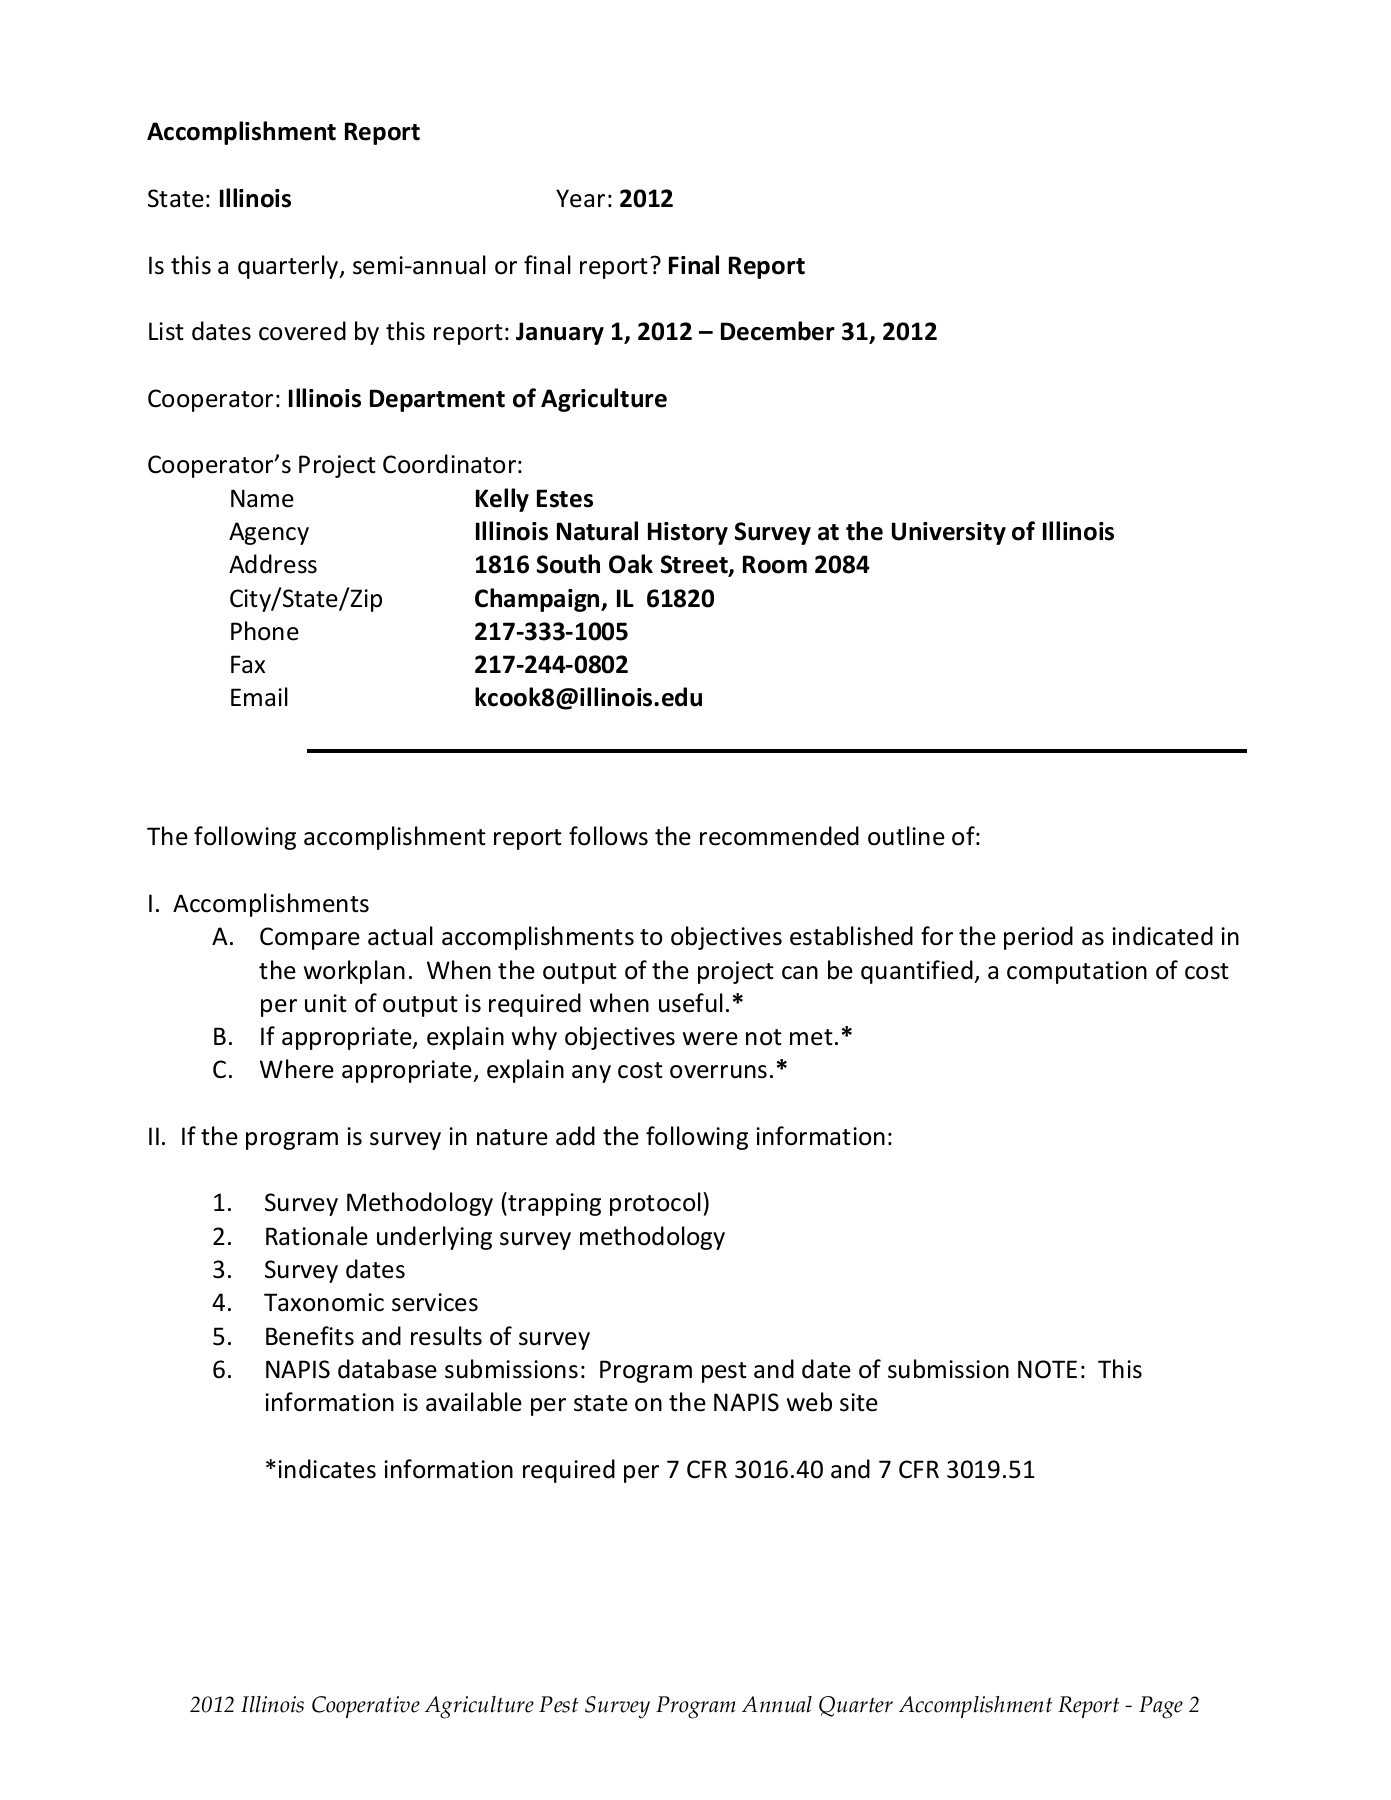 Accomplishment Report Format – Illinois Natural History Survy Within Weekly Accomplishment Report Template